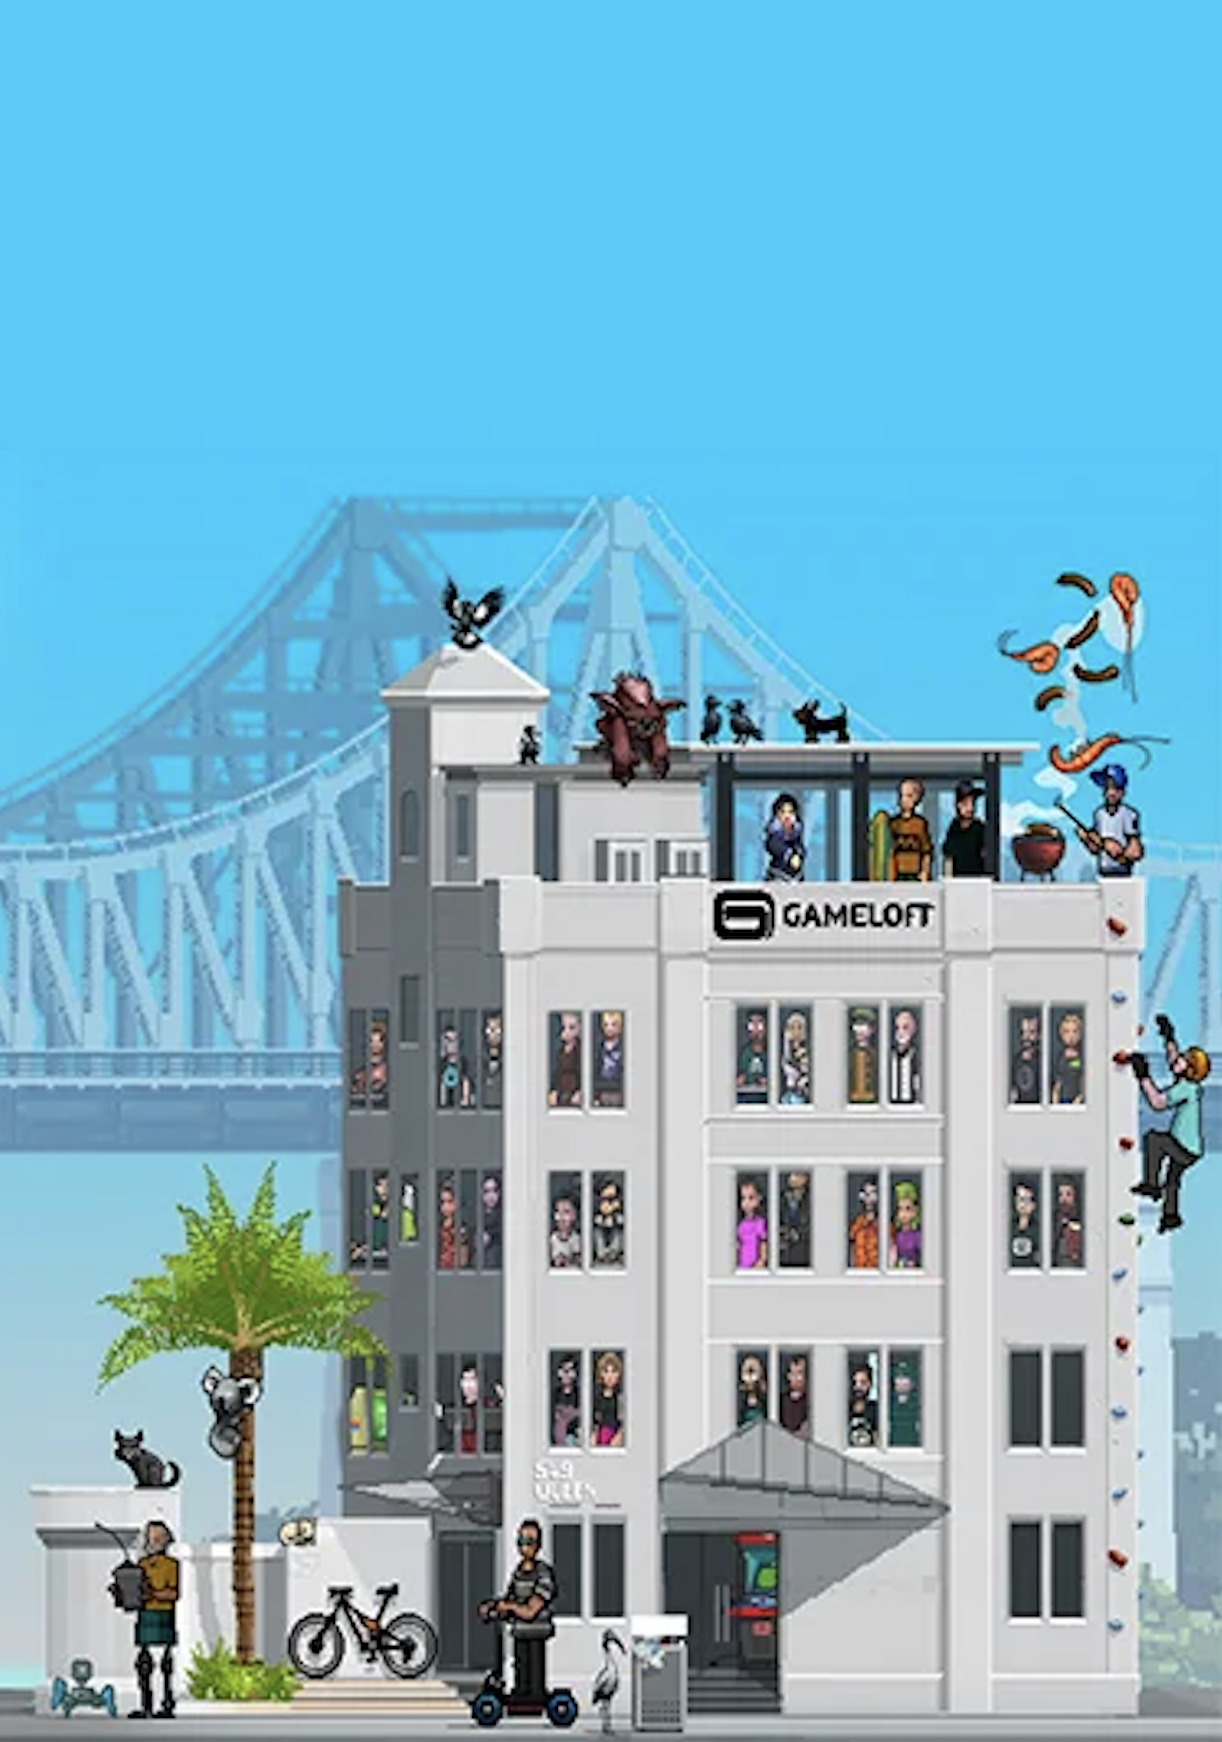 An illustration of the Brisbane Gameloft Studio with the Story Bridge behind it